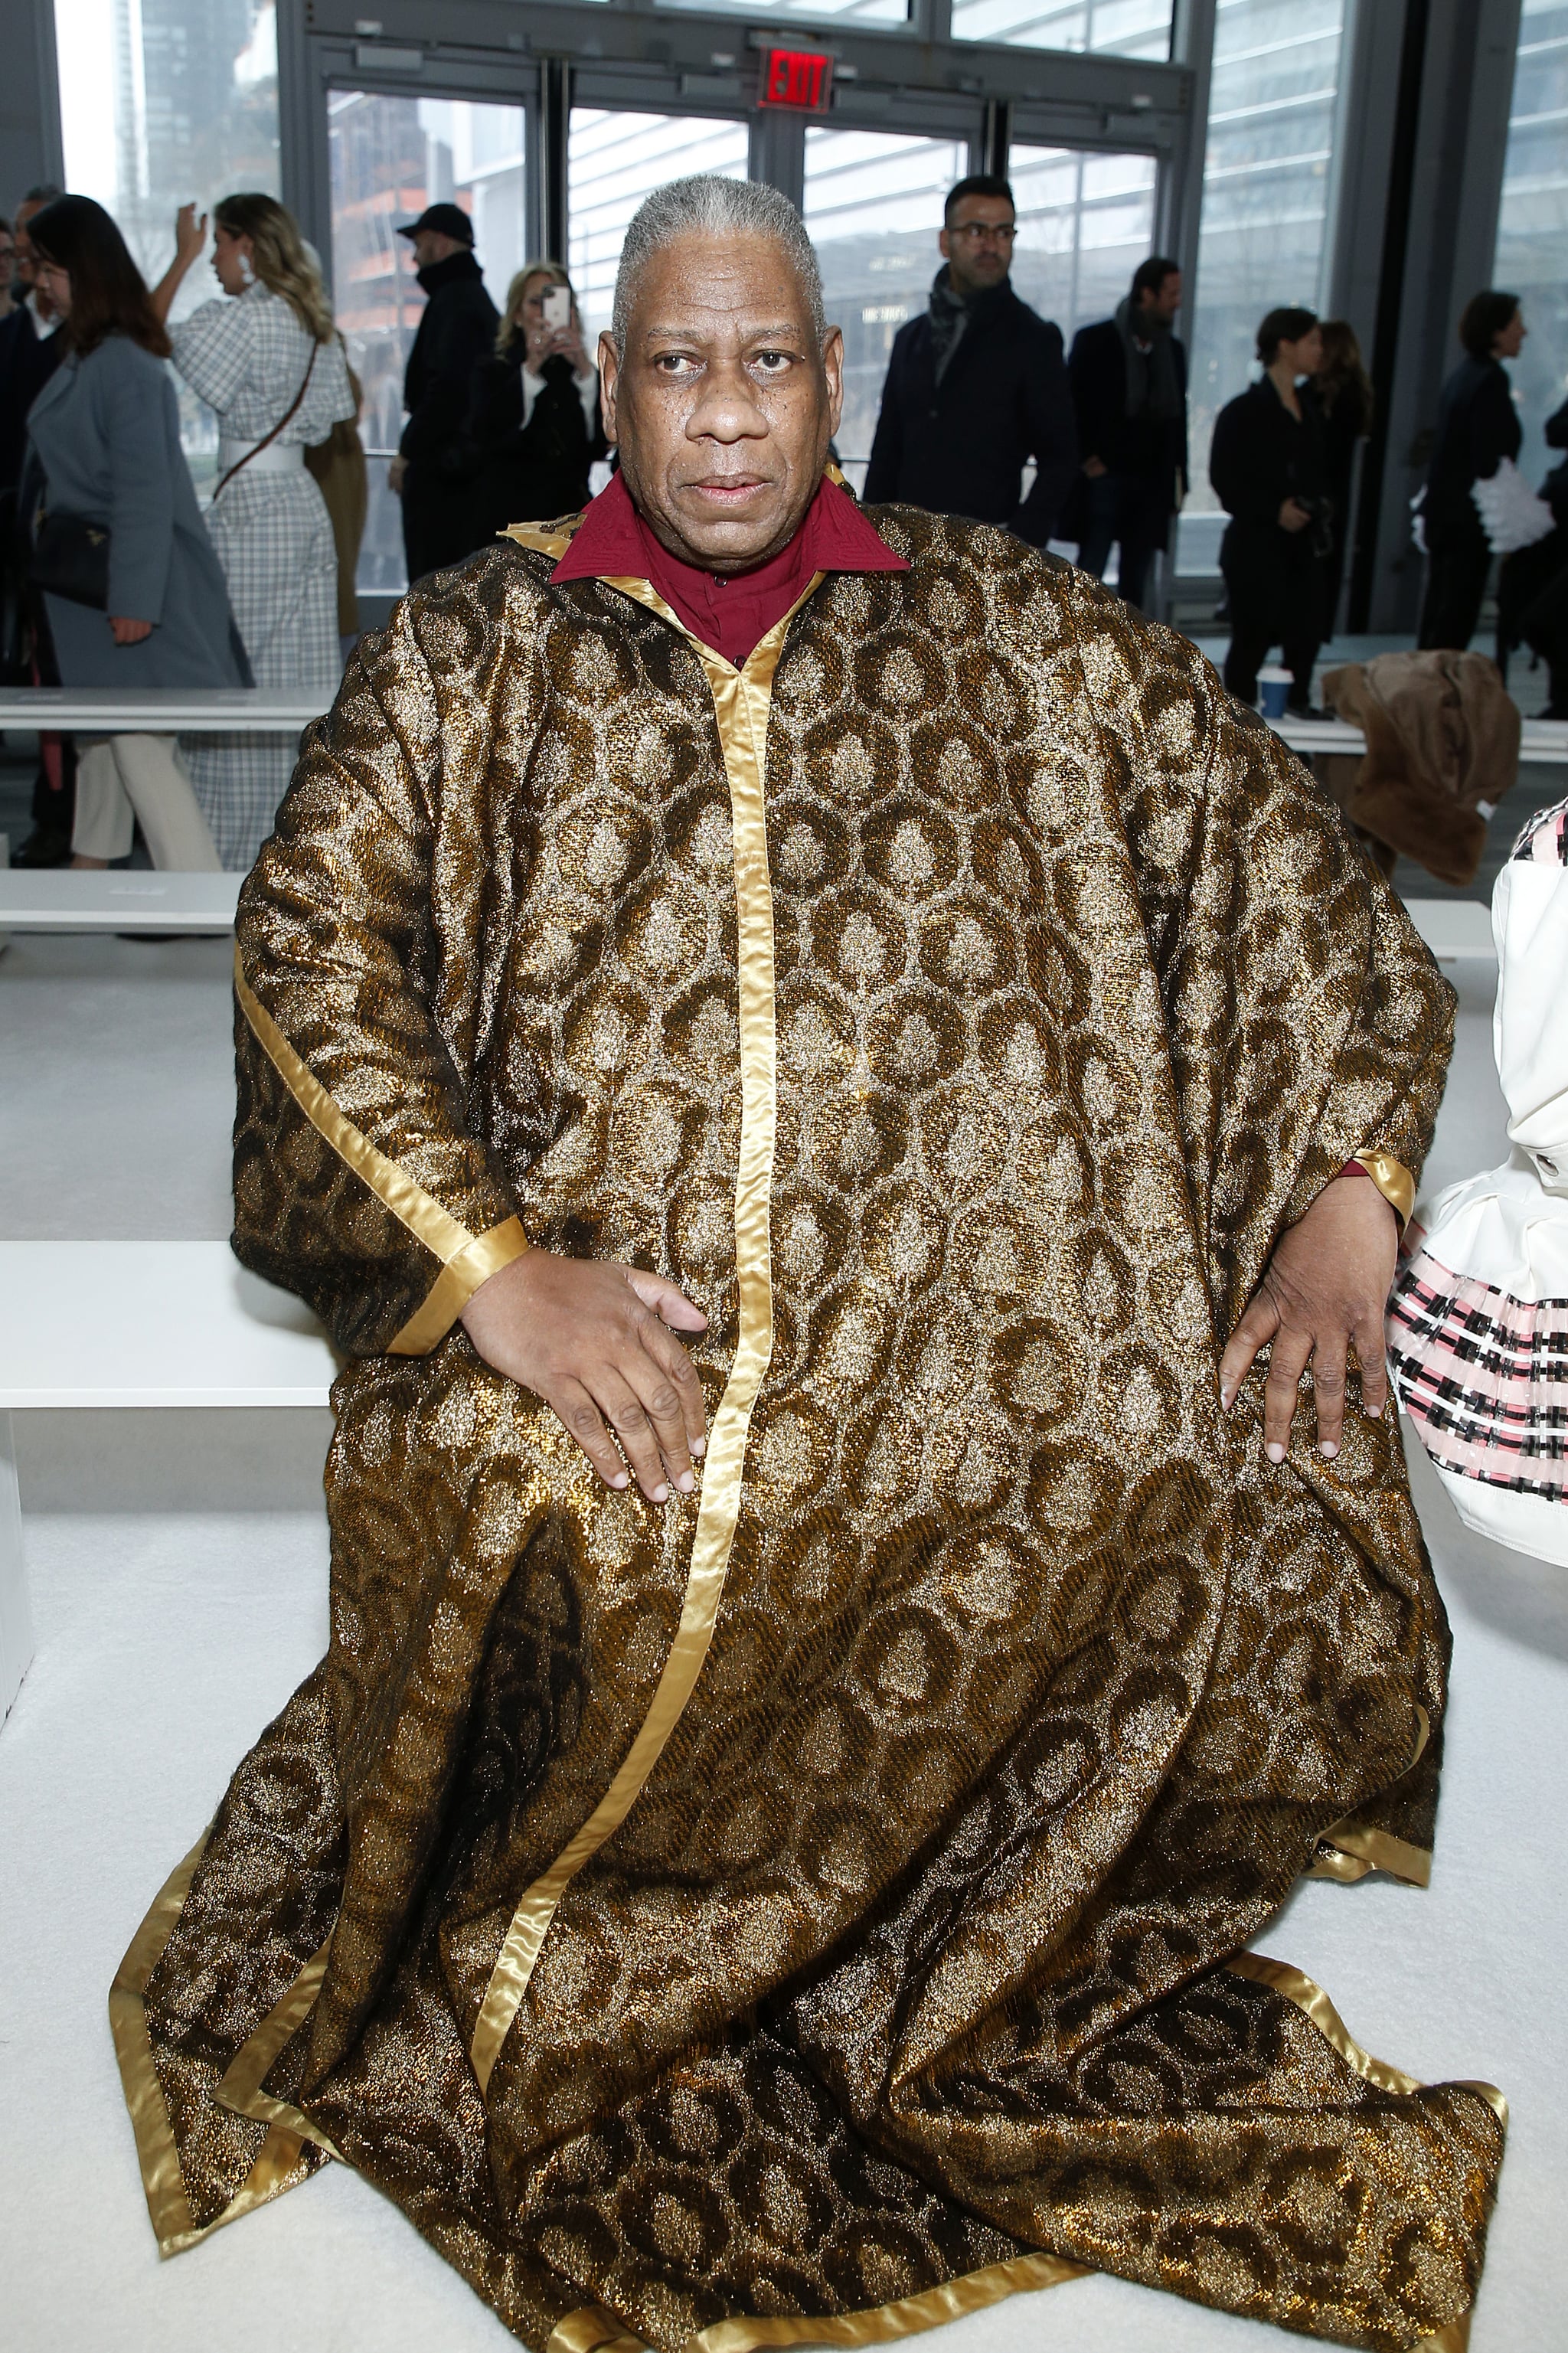 NEW YORK, NEW YORK - FEBRUARY 10: André Leon Talley attends the front row for Carolina Herrera during New York Fashion Week on February 10, 2020 in New York City. (Photo by John Lamparski/Getty Images)